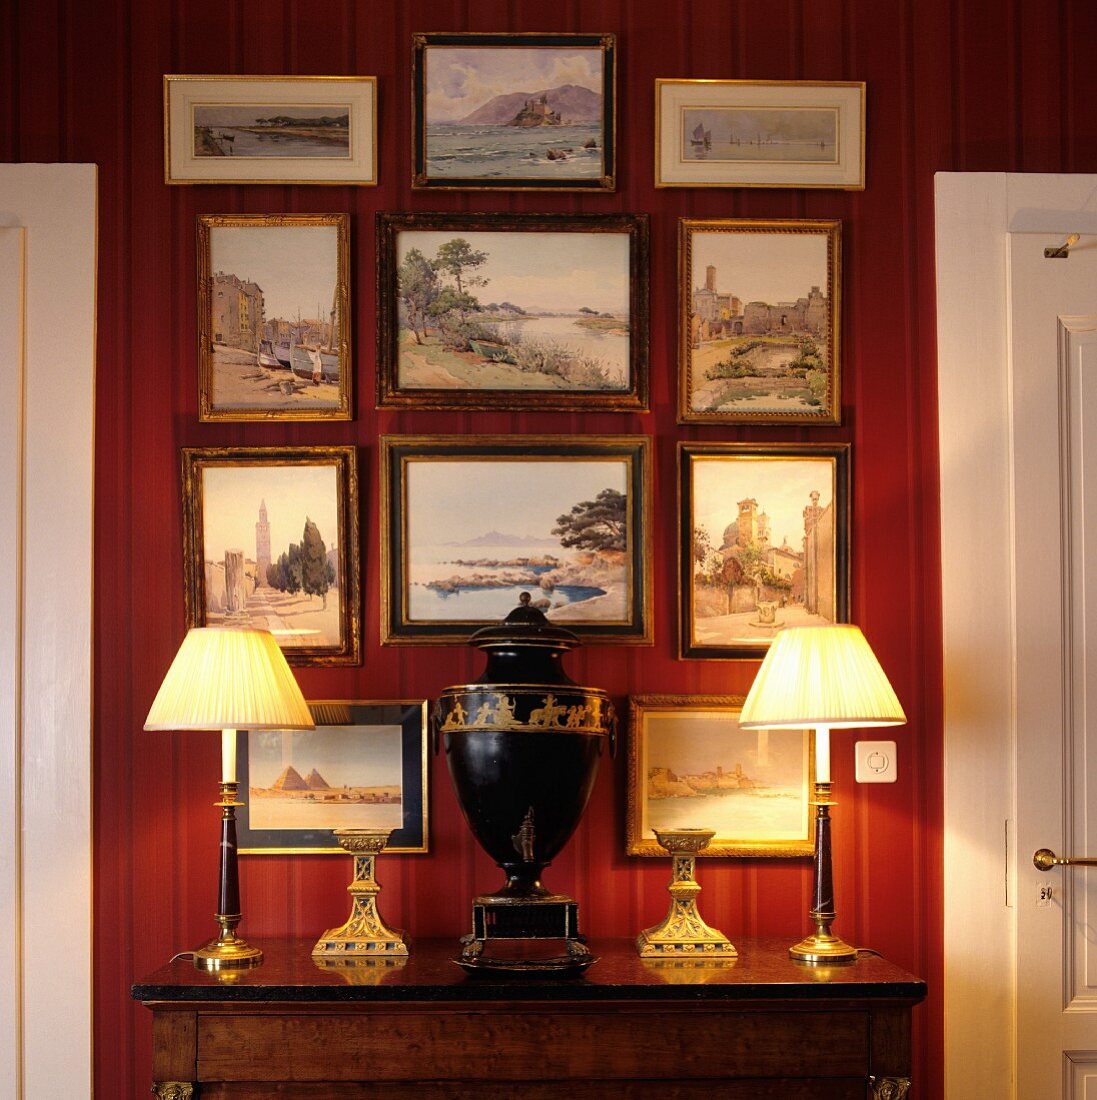 Urn-shaped vase flanked by table lamps with pleated fabric lampshades on antique cabinet below gallery of framed pictures